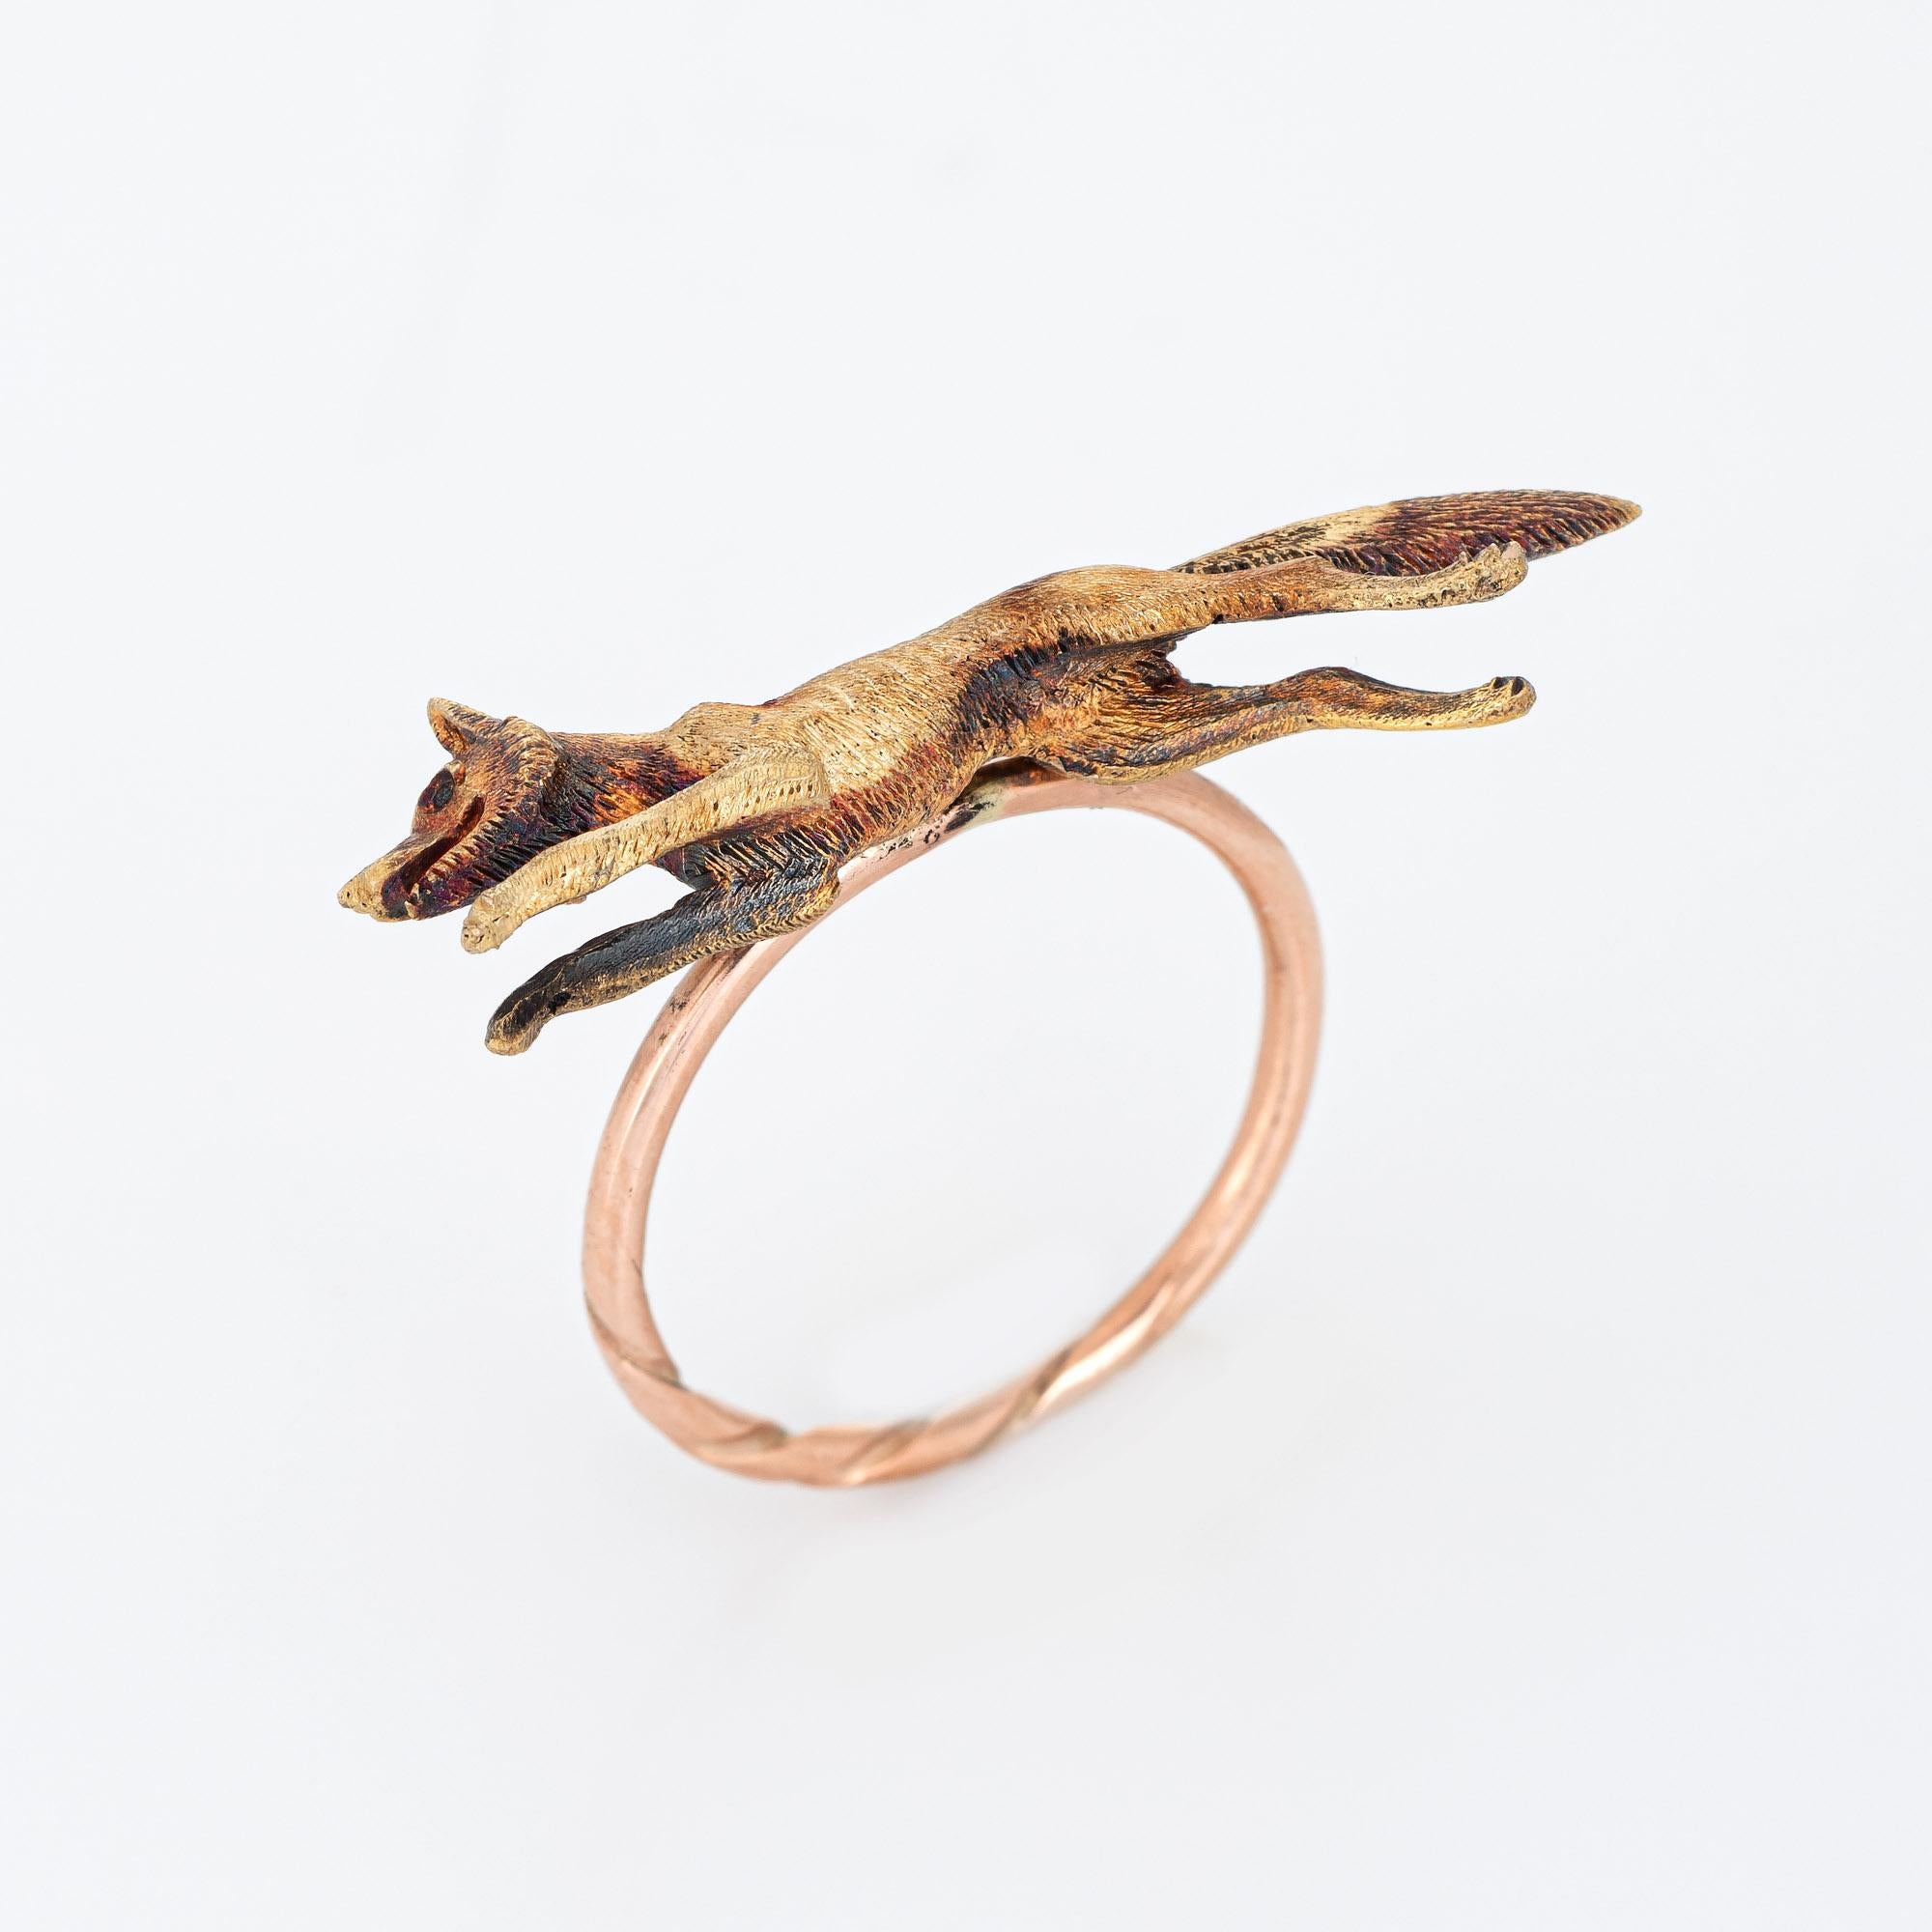 Originally an antique Victorian era stick pin (circa 1880s to 1900s), the fox is crafted in 14 karat yellow gold.

The ring is mounted with the original stick pin. Our jeweler rounded the stick pin into a slim band for the finger. The beautifully